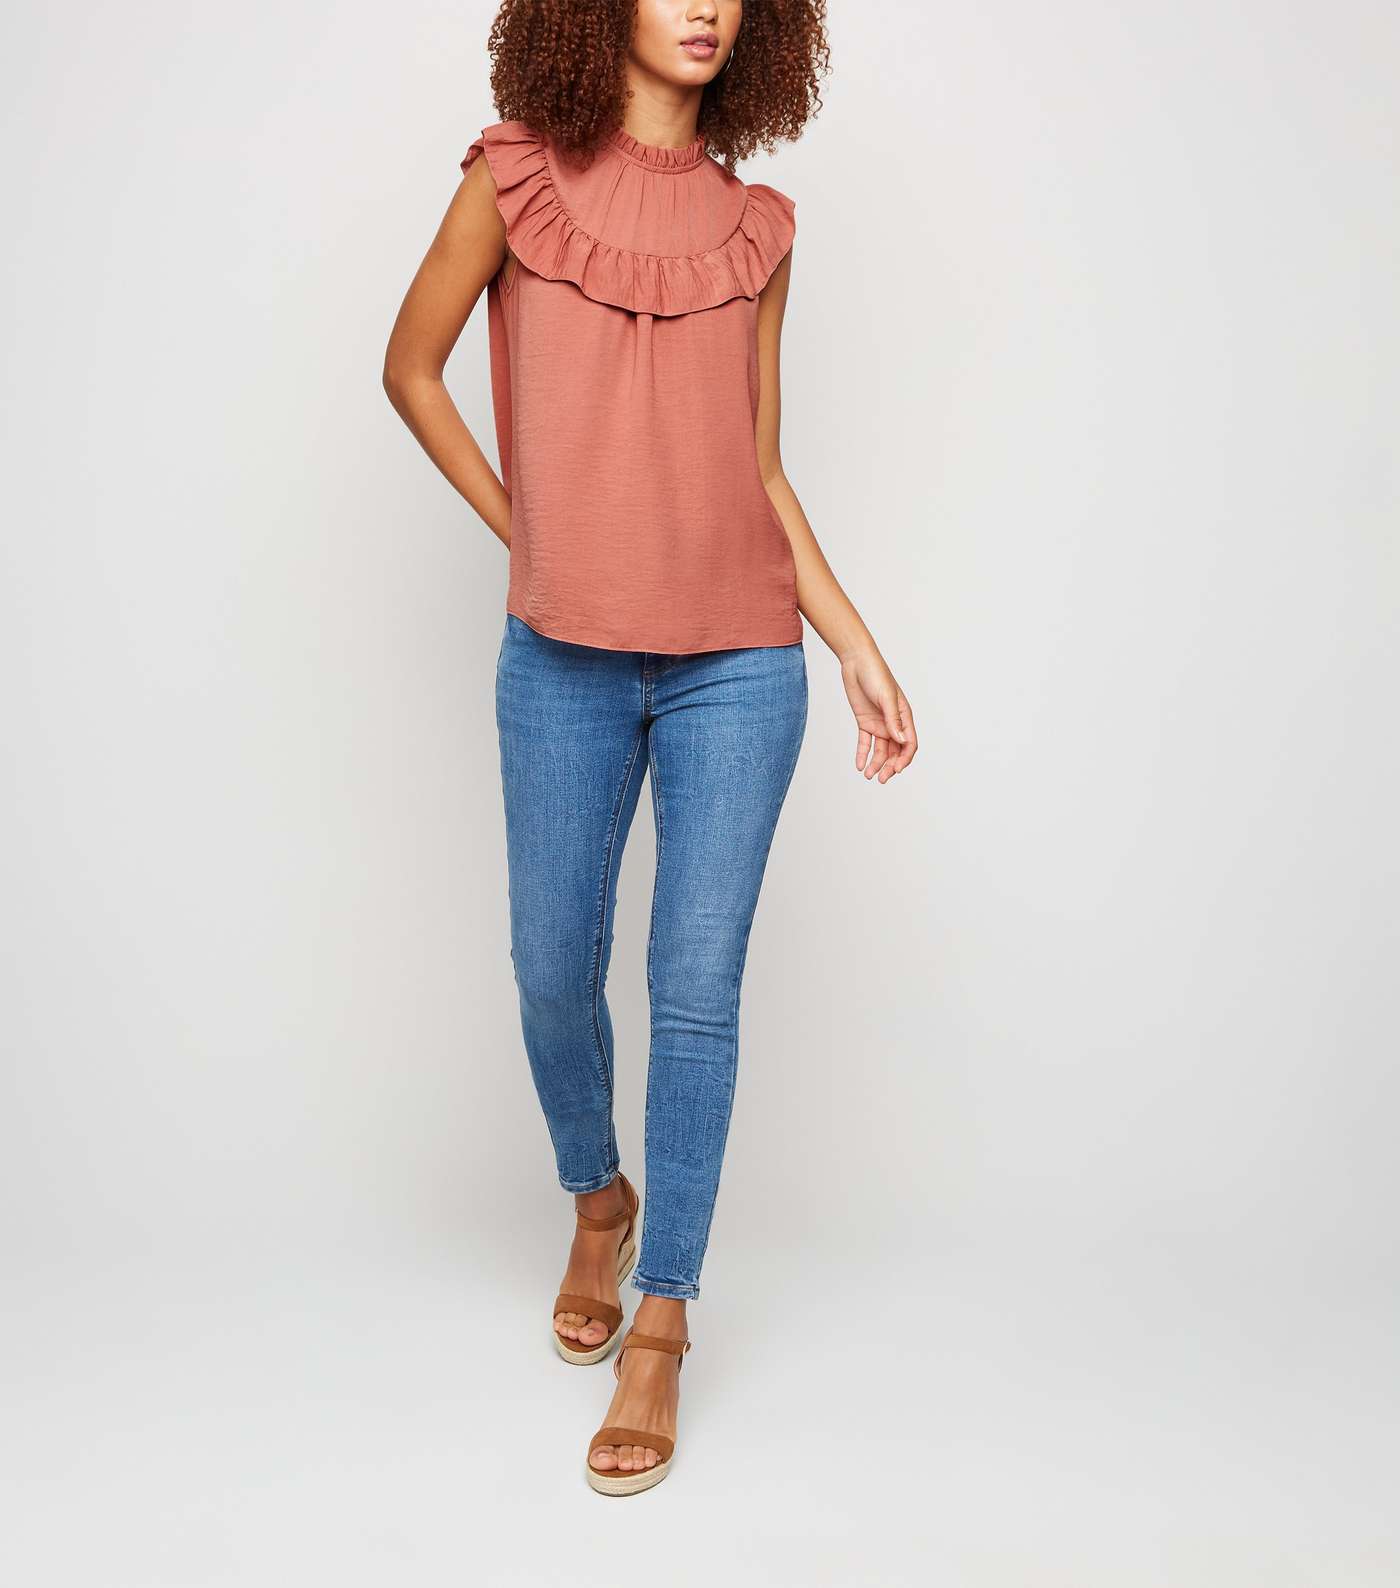 Mid Pink Frill High Neck Blouse Image 2